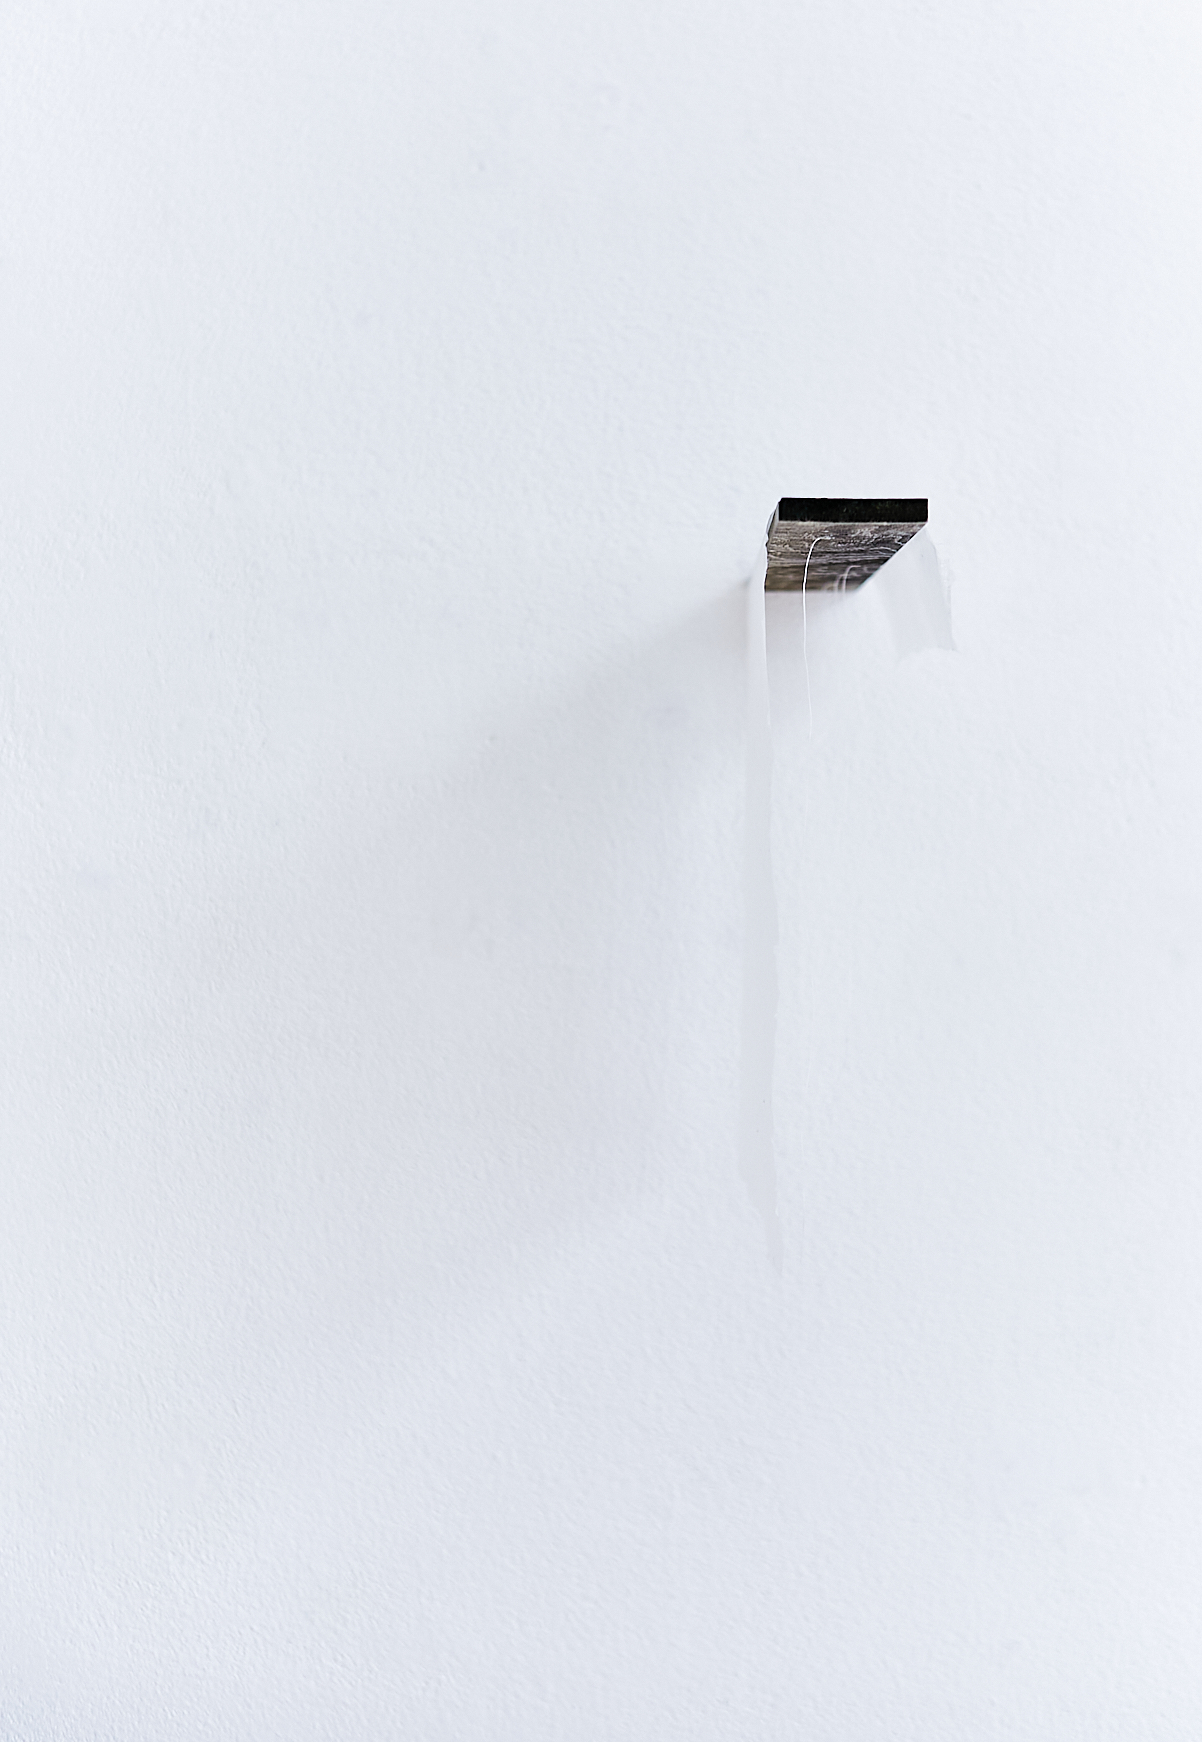 a piece of dark brown wood hanging off a white wall. A white handmade paper hangs over the wood as well as some white strings